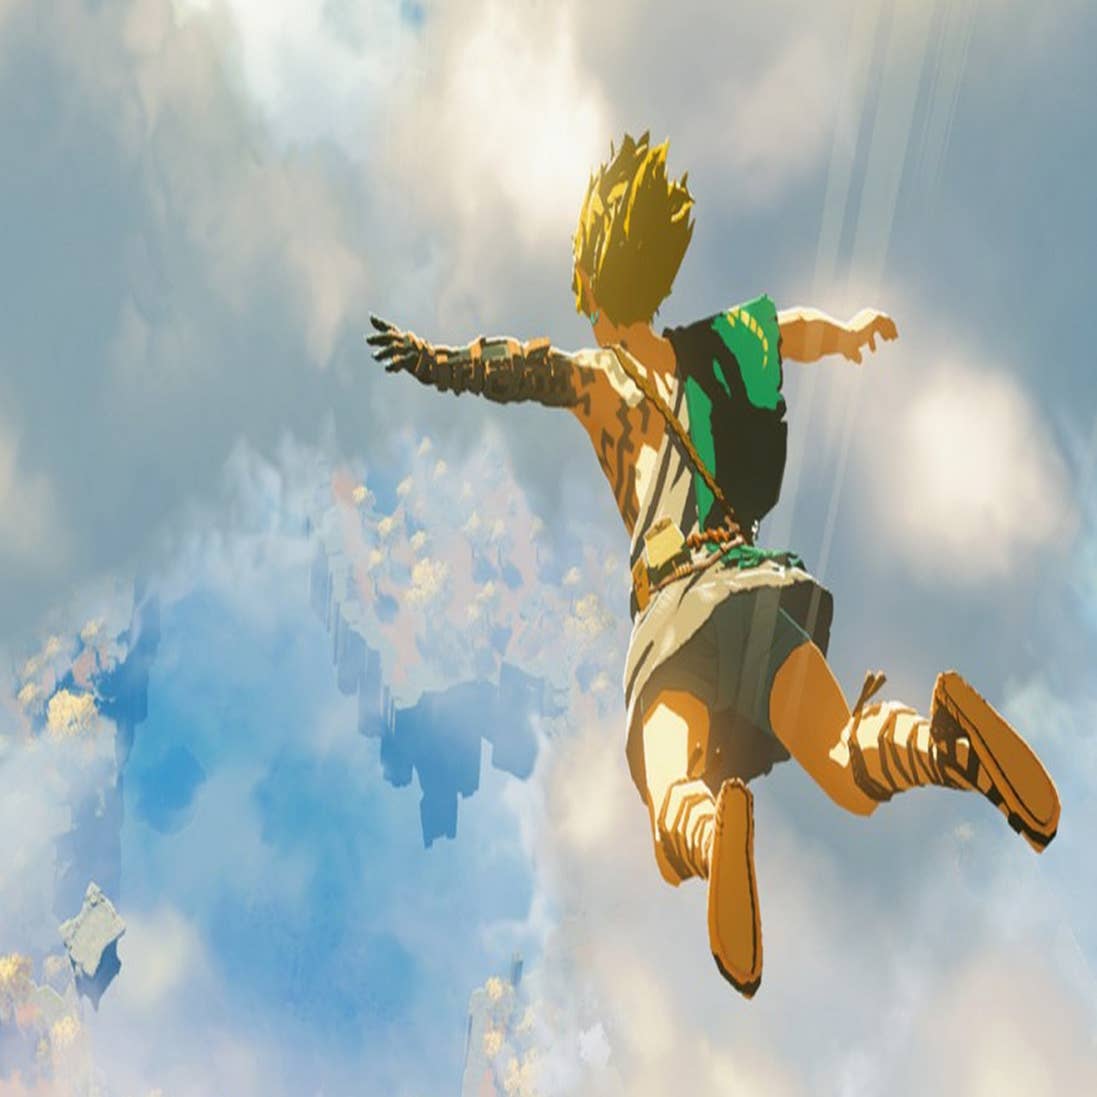 More 'The Legend Of Zelda: Breath Of The Wild 2' Updates Reportedly Coming  In June